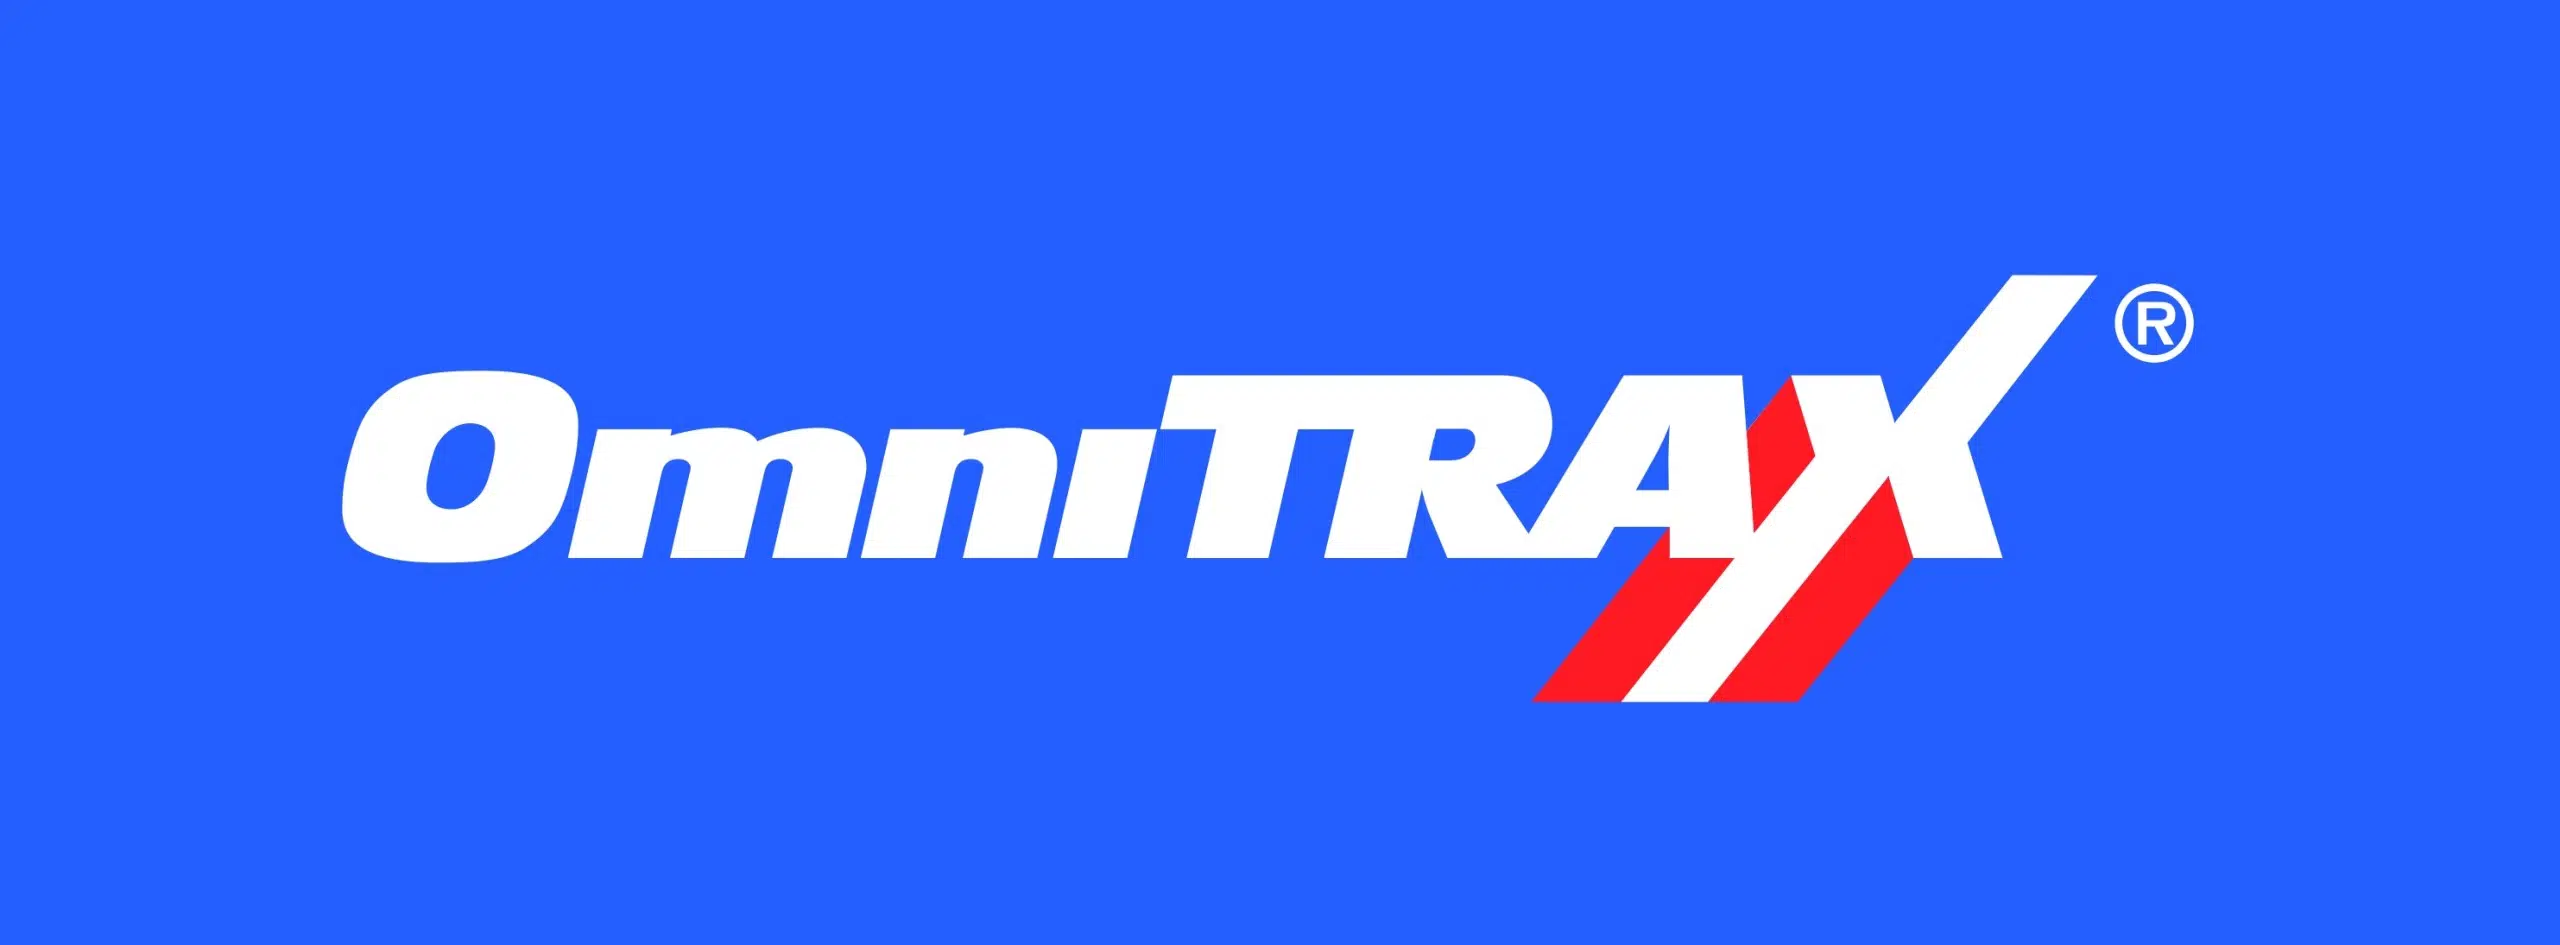 OmniTRAX Affiliate Partners with Topflight Grain Coop to Operate Decatur Central Railroad 